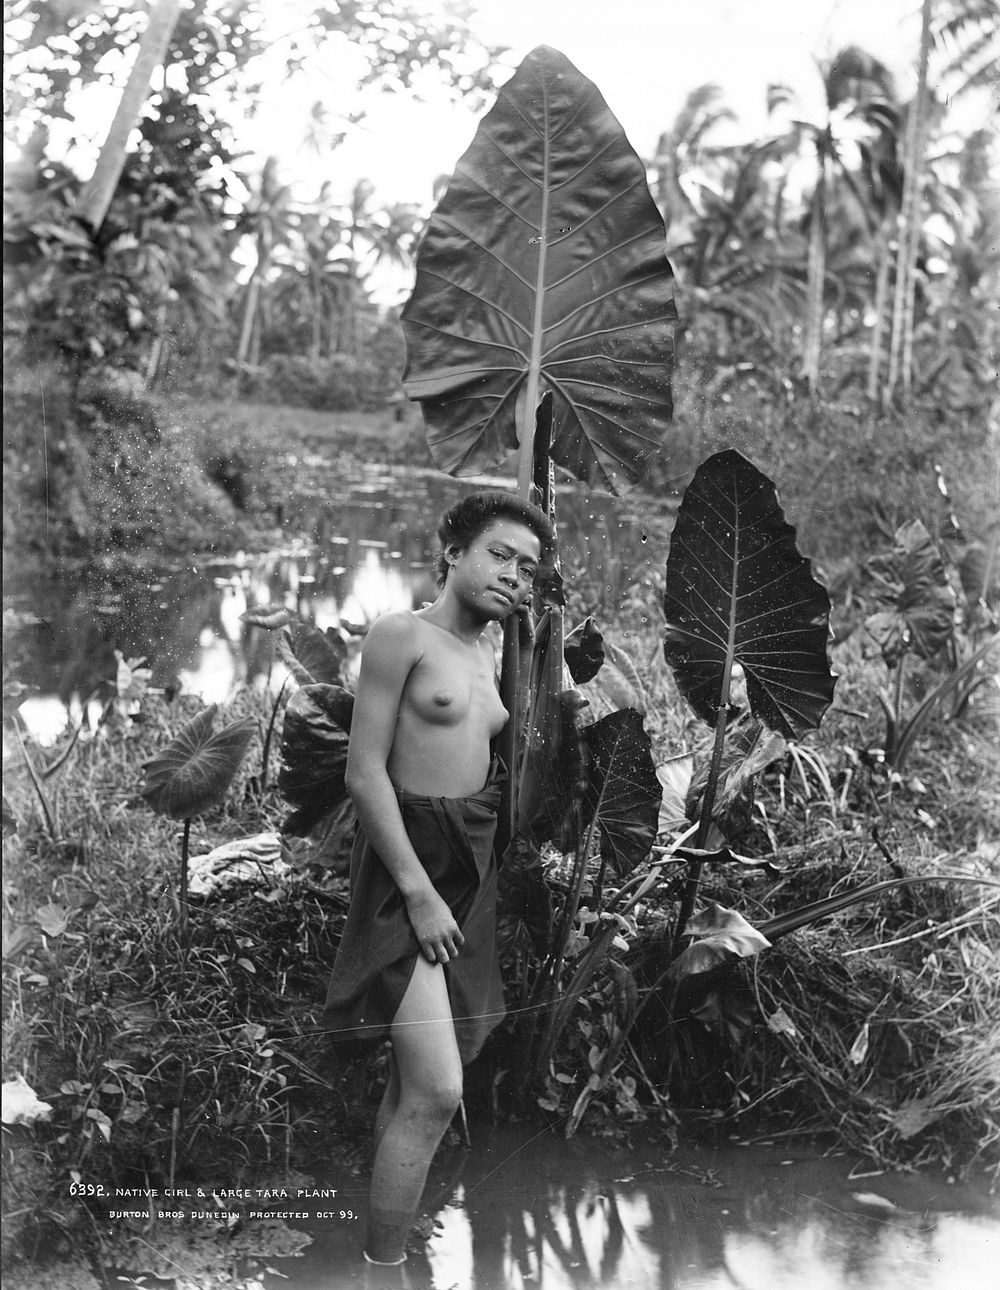 Native girl and large tara plant by Muir and Moodie.